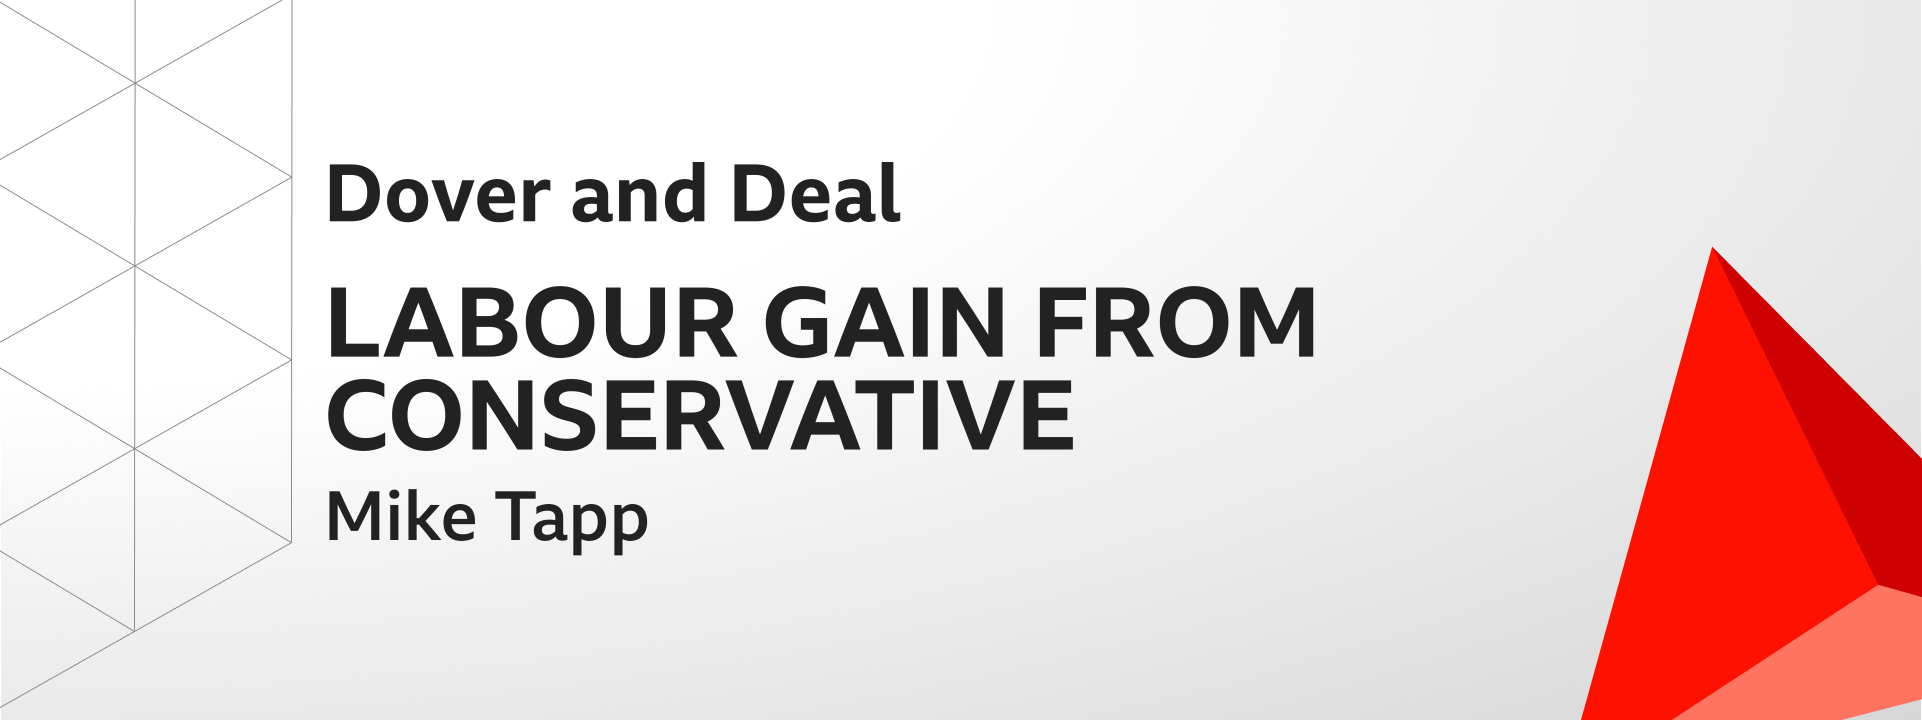 Graphic showing Labour gains Dover and Deal from the Conservatives. The winning candidate was Mike Tapp.